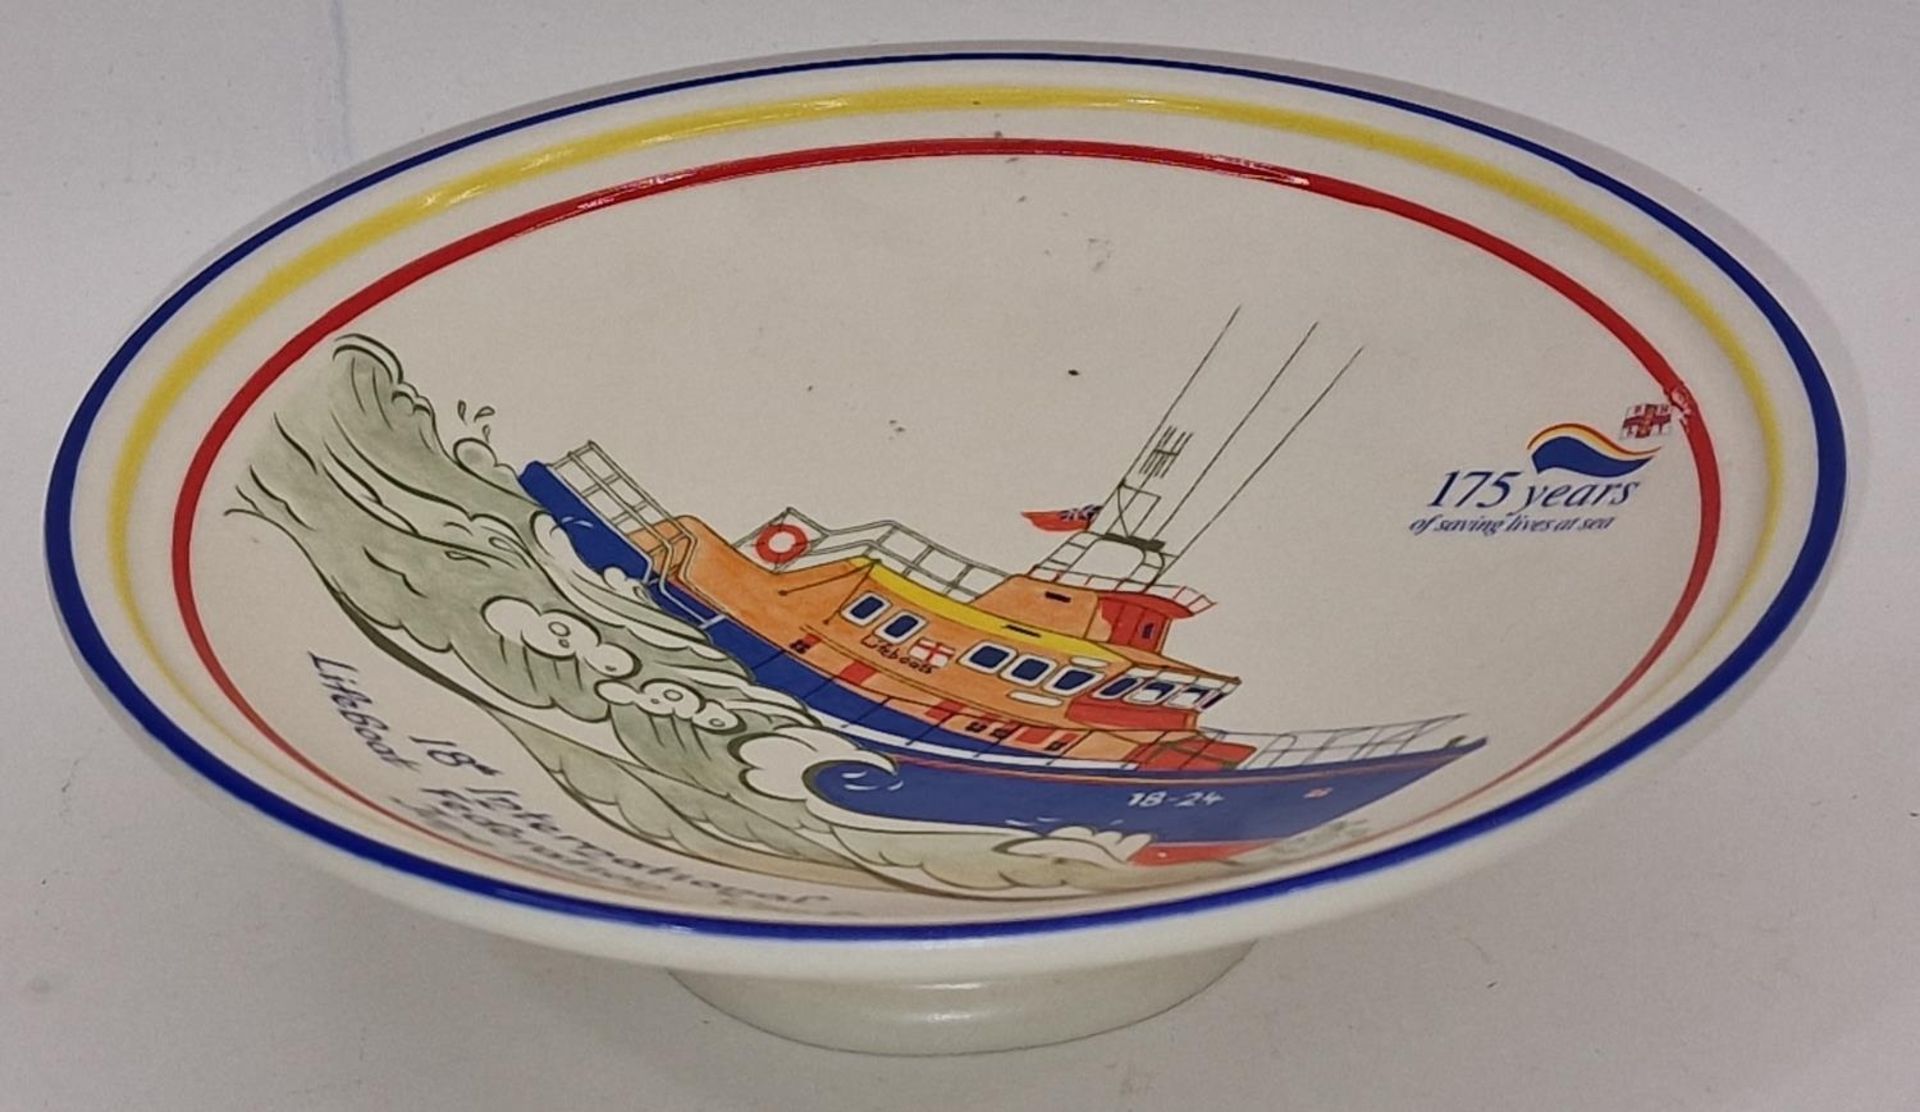 Poole Pottery RNLI Lifeboat Federation Conference bowl 1999. - Image 2 of 3